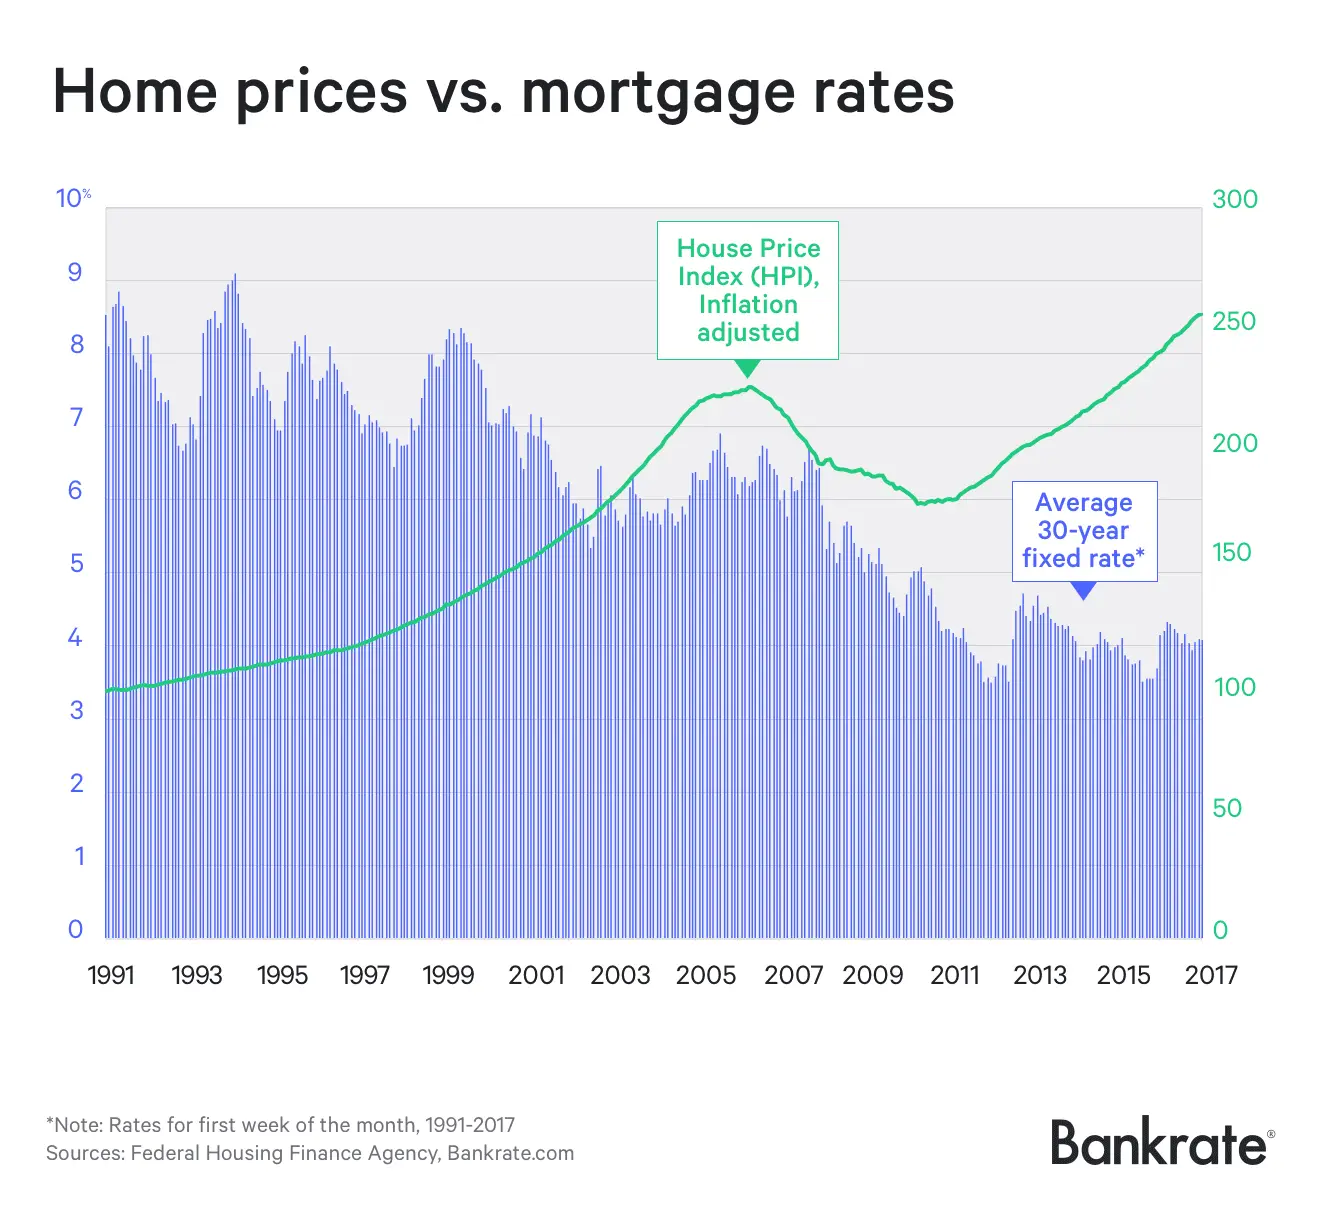 Do Rising Mortgage Rates Trigger Lower House Prices?